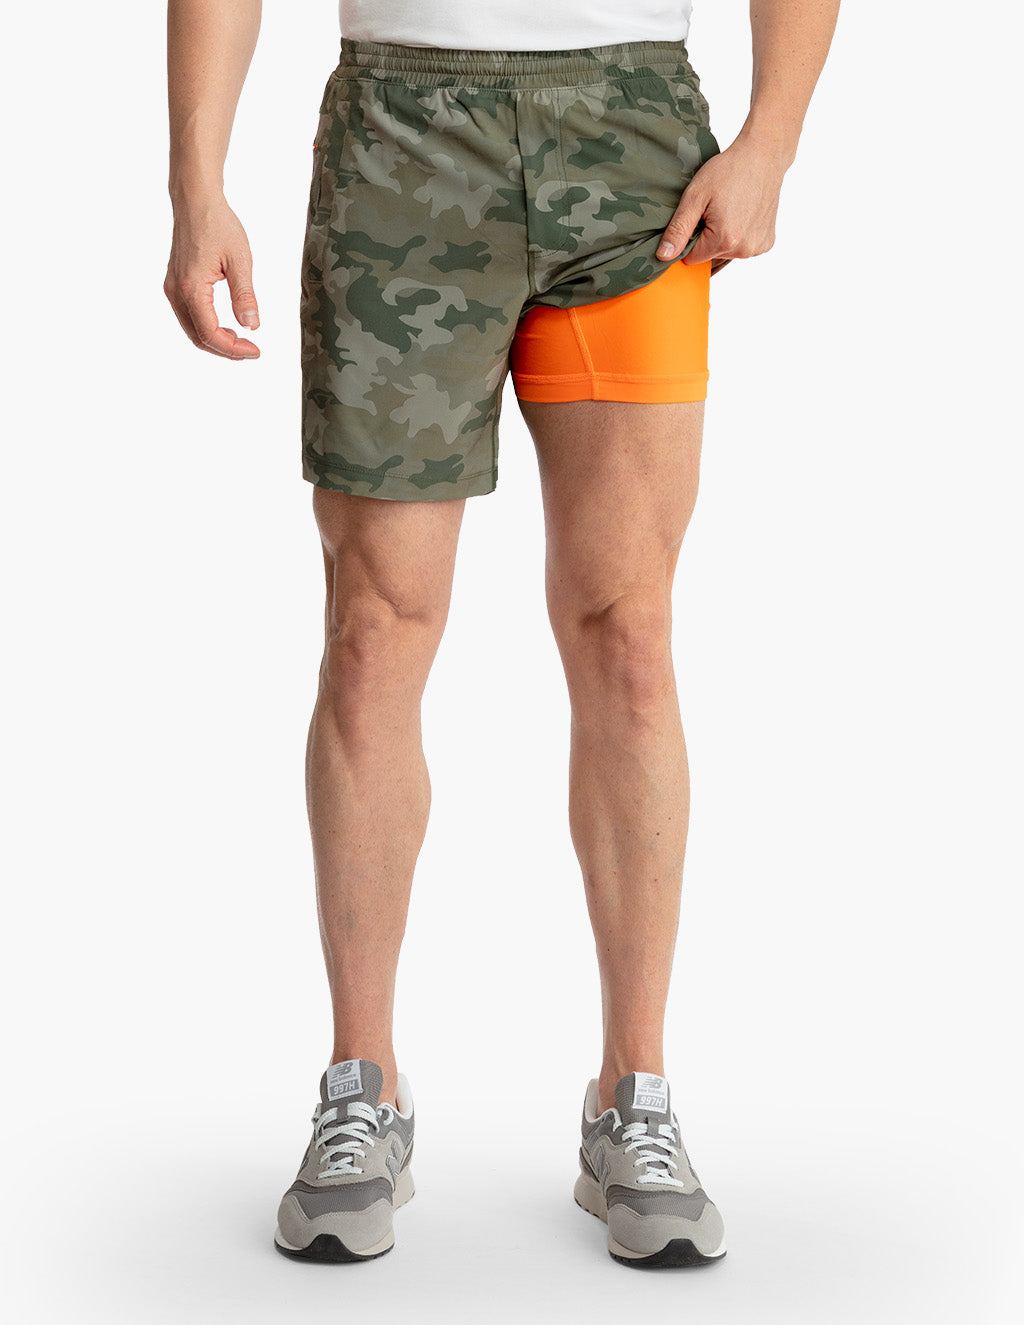 On the Hunt Camo Underwear Two Left Feet Mens Trunks